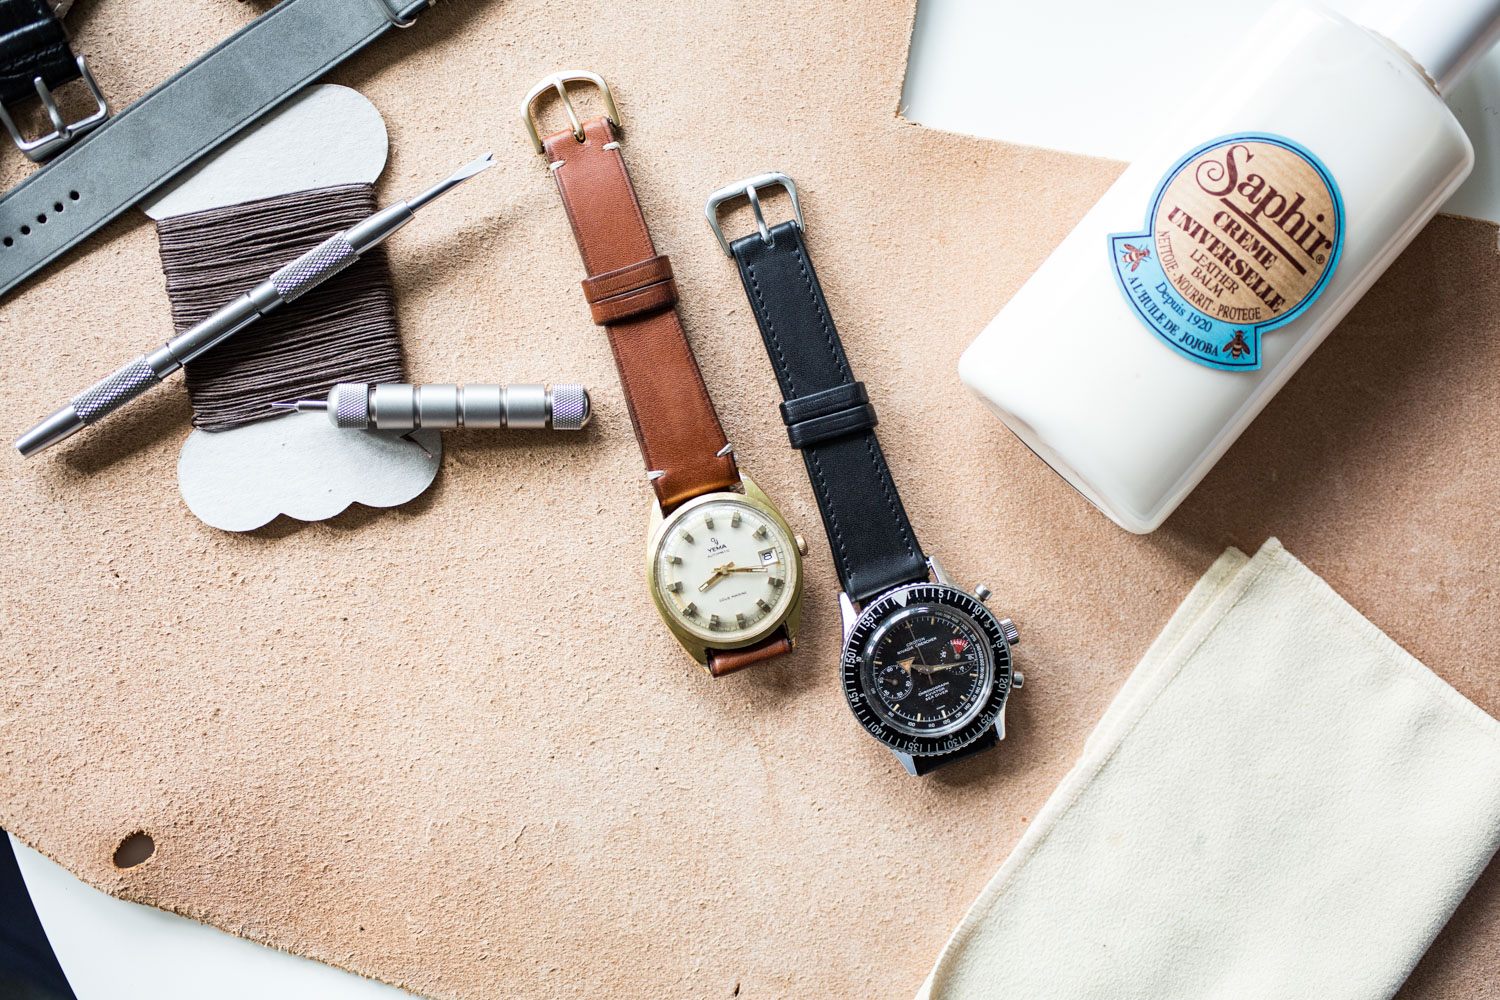 Leather strap watches